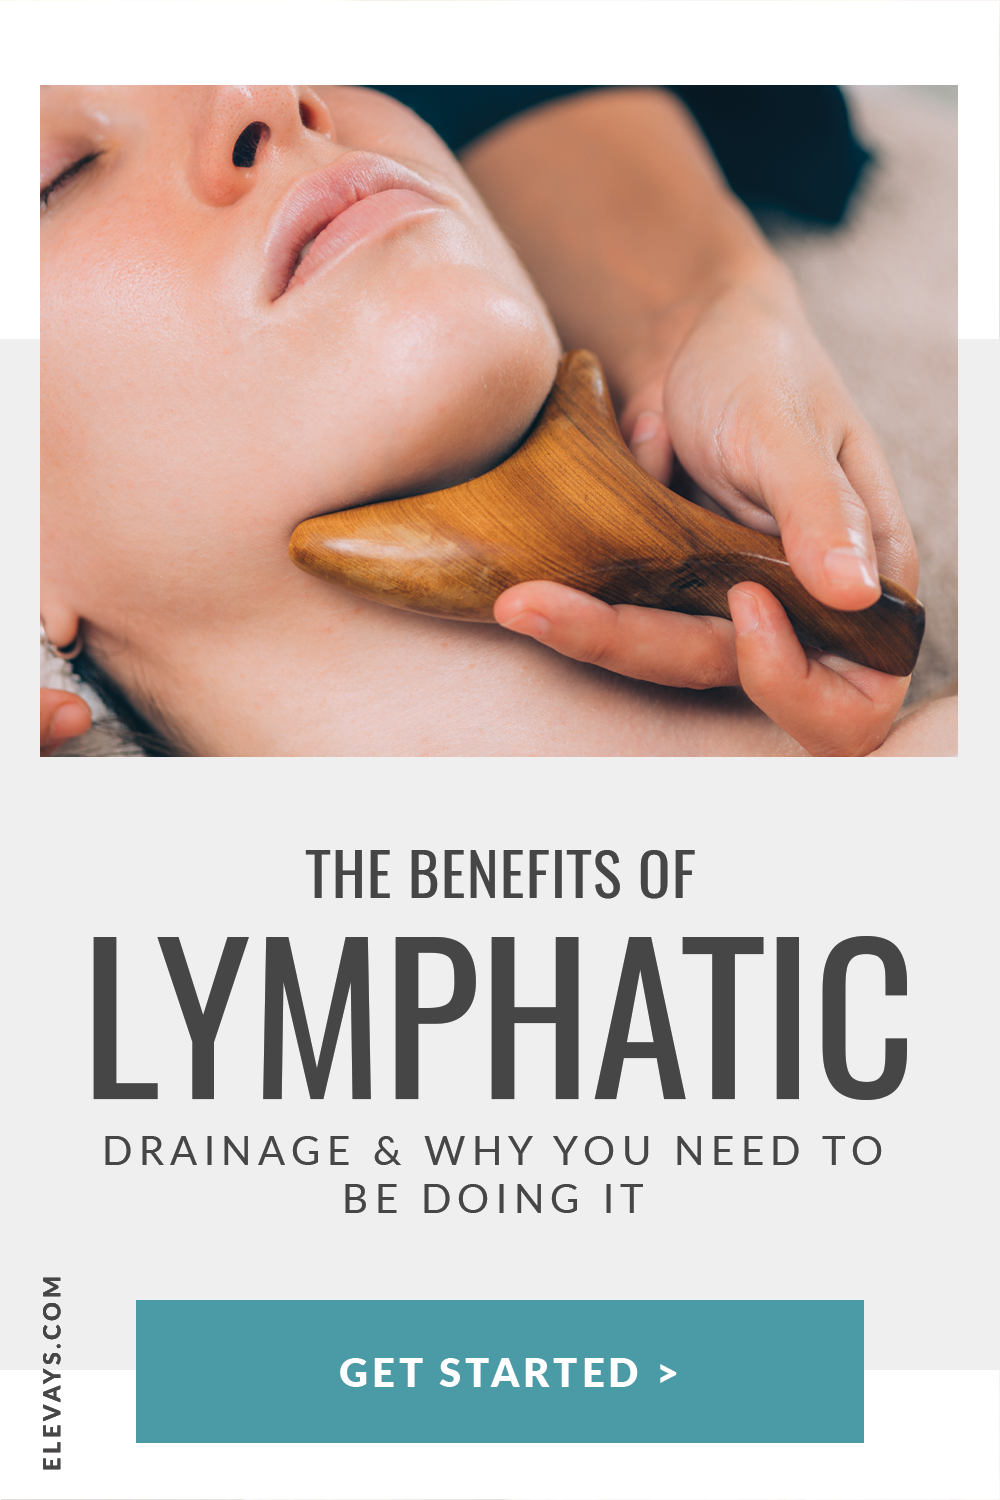 The Benefits of Lymphatic Drainage & Lymphatic Self Massage